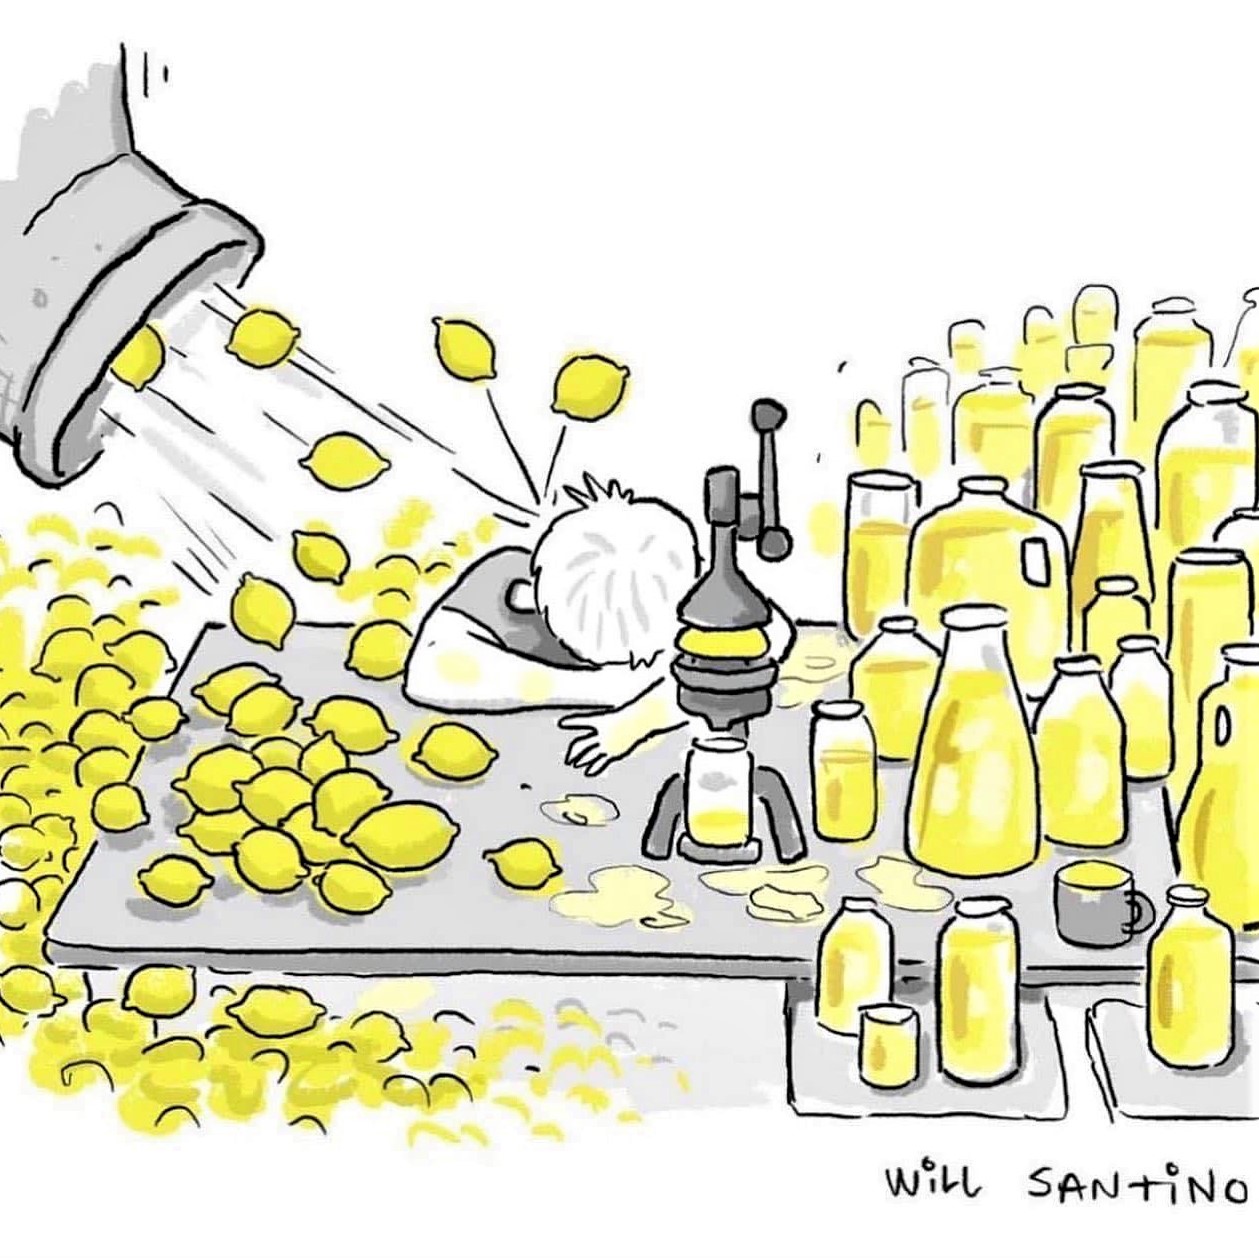 Cartoon: If life gives you lemons ... well, there is a limit on how much lemonade you can make!